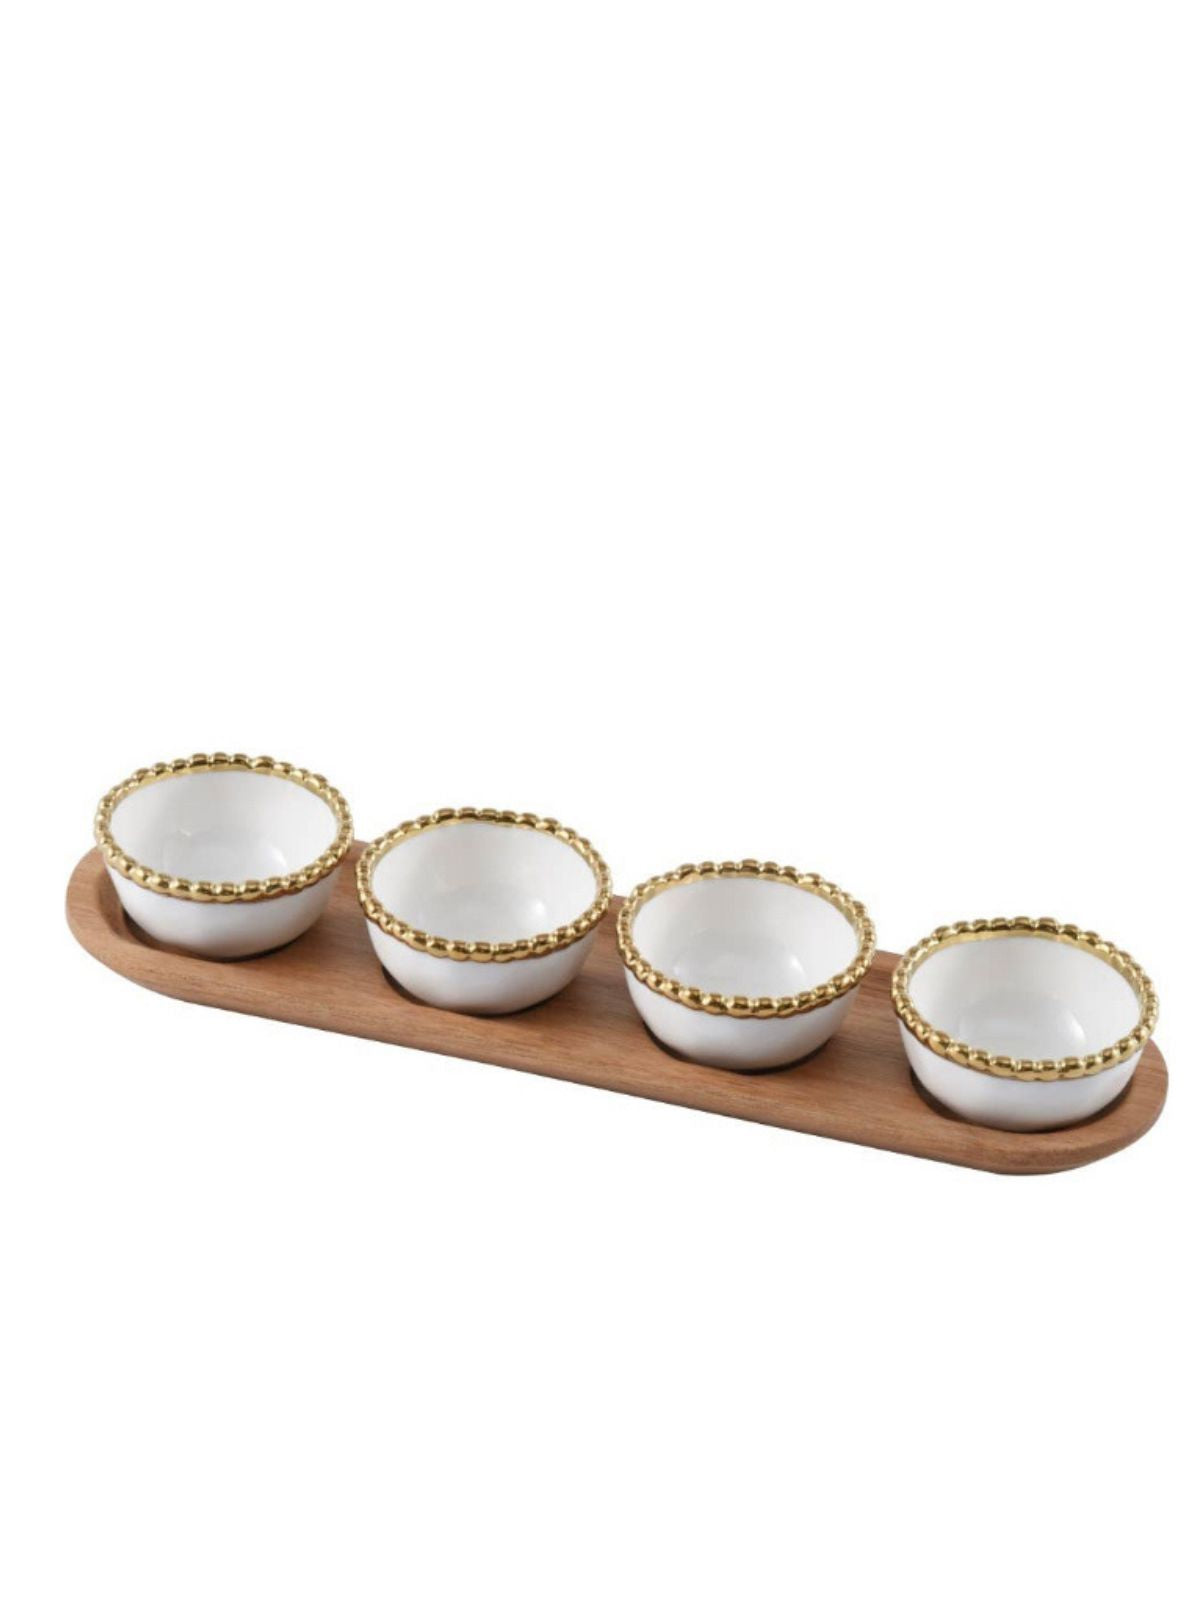 Four versatile round snack bowls presented on a handsome acacia wood tray. Striking and elegant golden titanium finished high-fired porcelain.